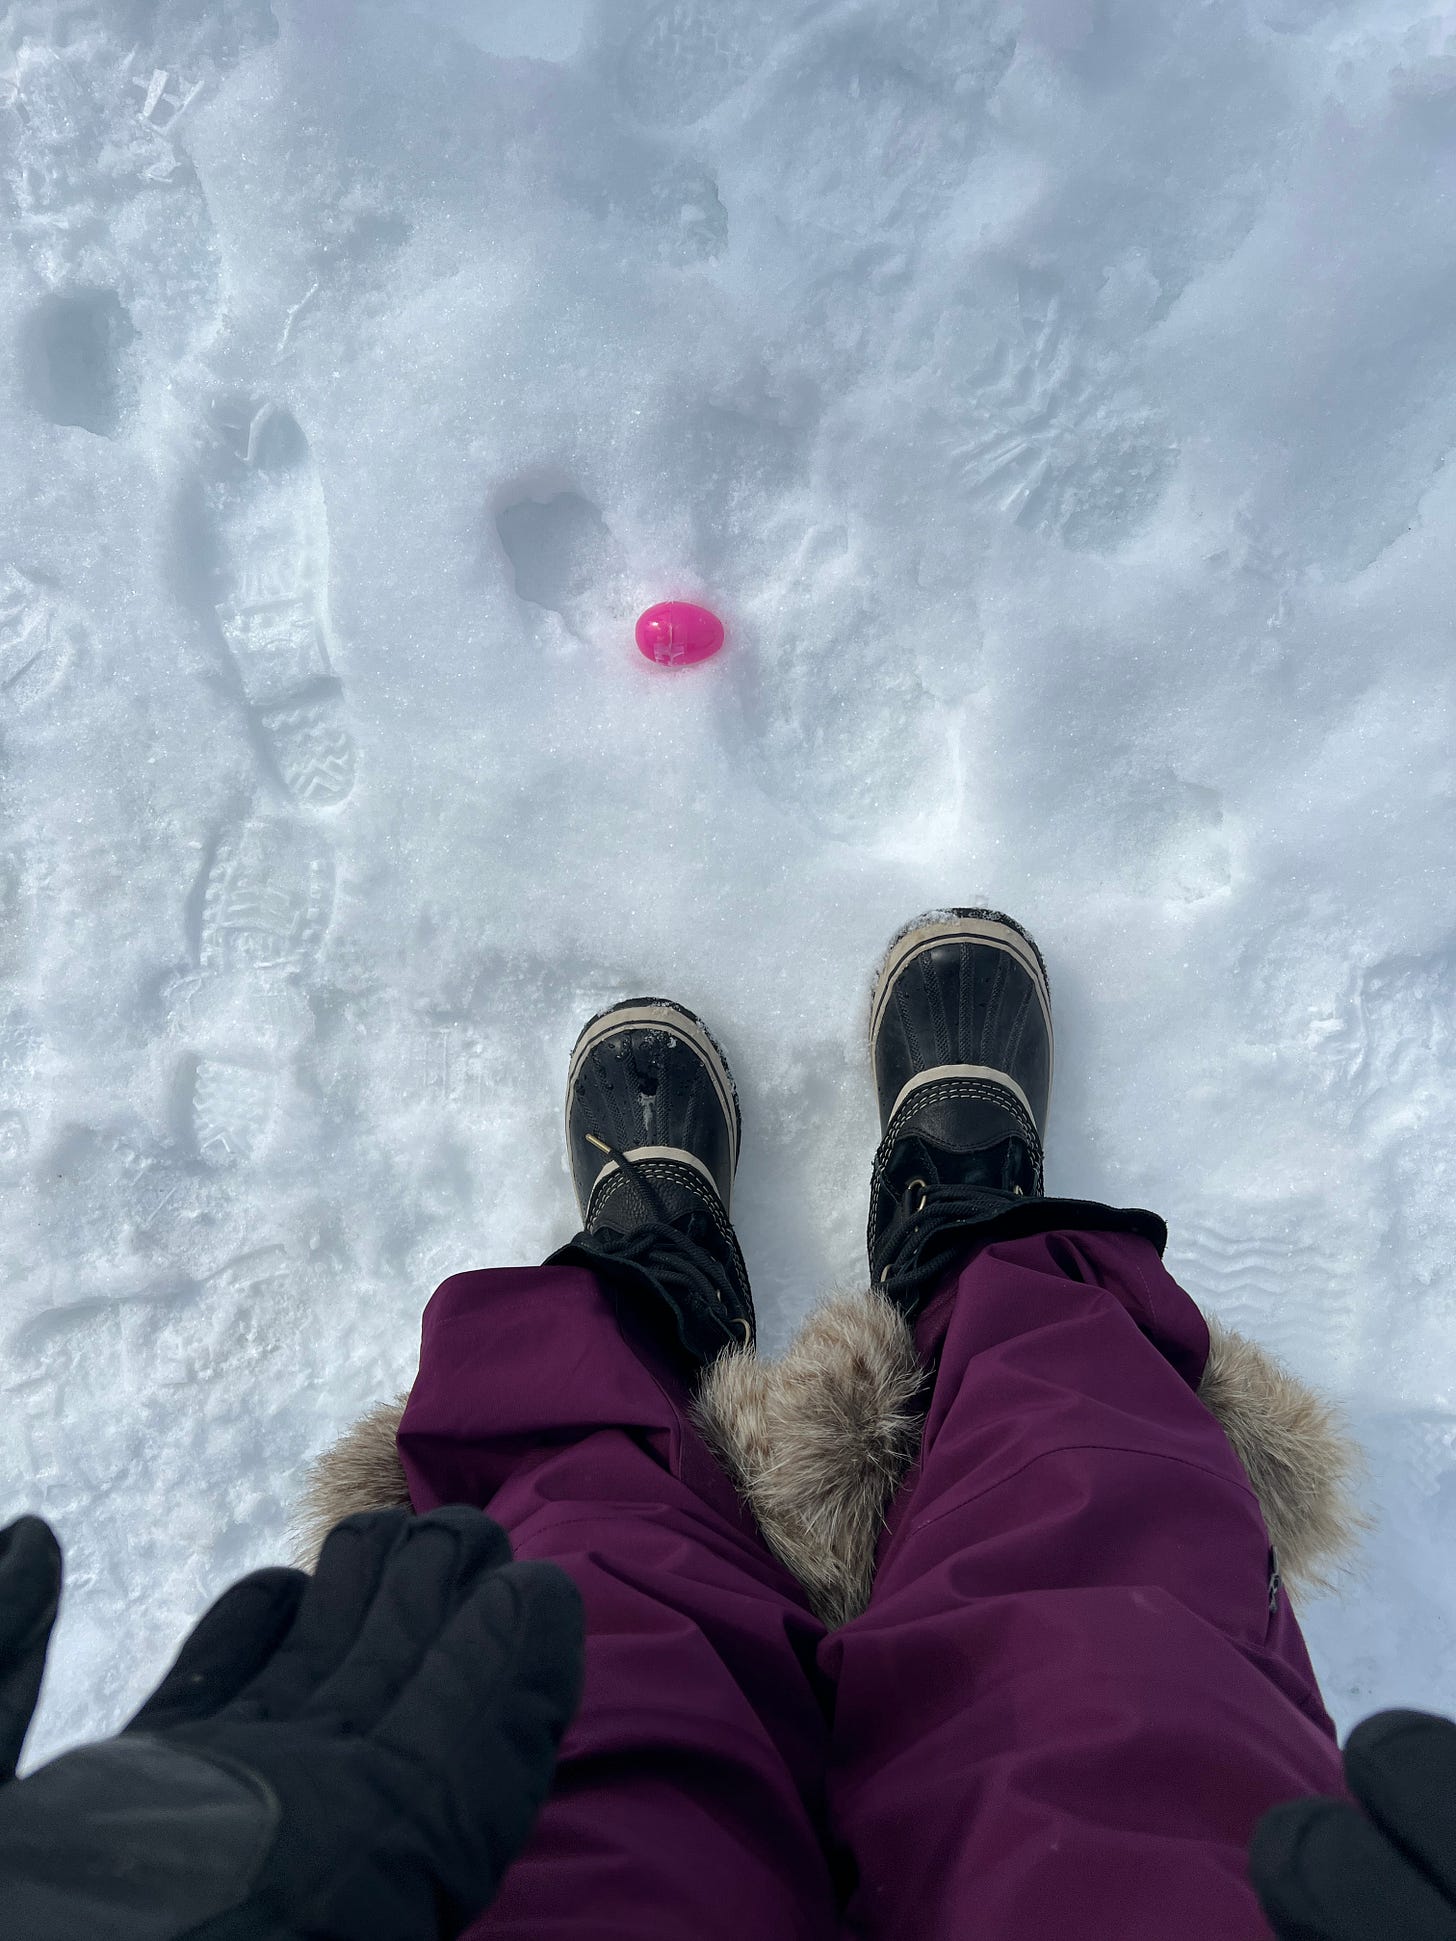 Molly standing in the snow in heavy boots, snow pants and gloves, looking down at a pink plastic Easter egg in the snow.